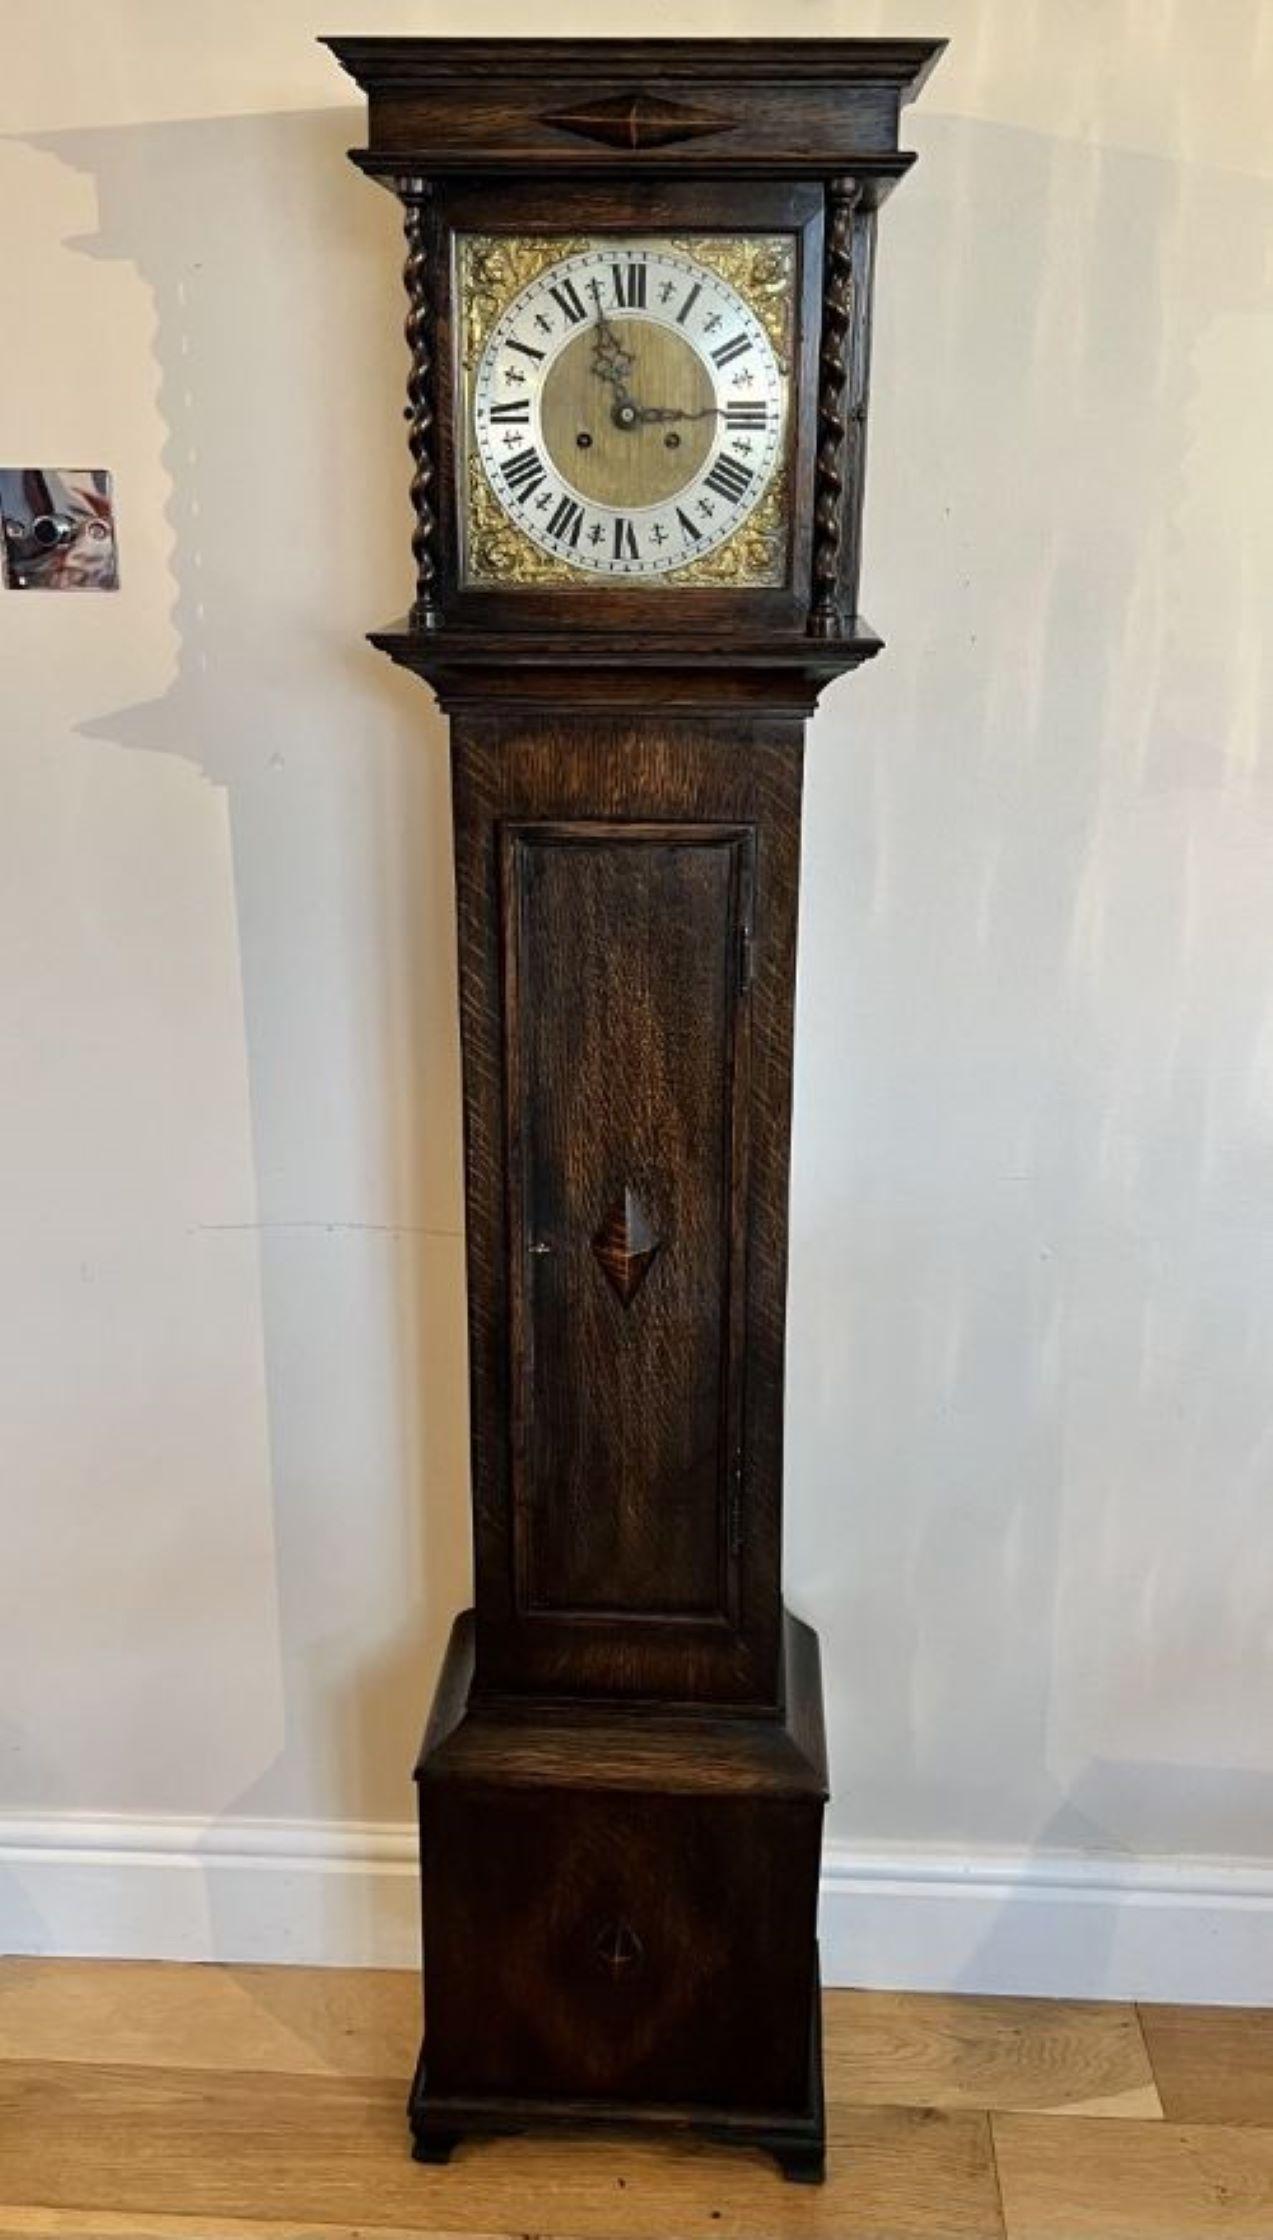 Antique quality oak brass face grandmother clock having a quality brass dial silvered chapter ring with Roman numerals, original hands, eight day movement striking the hour and half hour on a gong, barley twist supports to the glass door, long oak